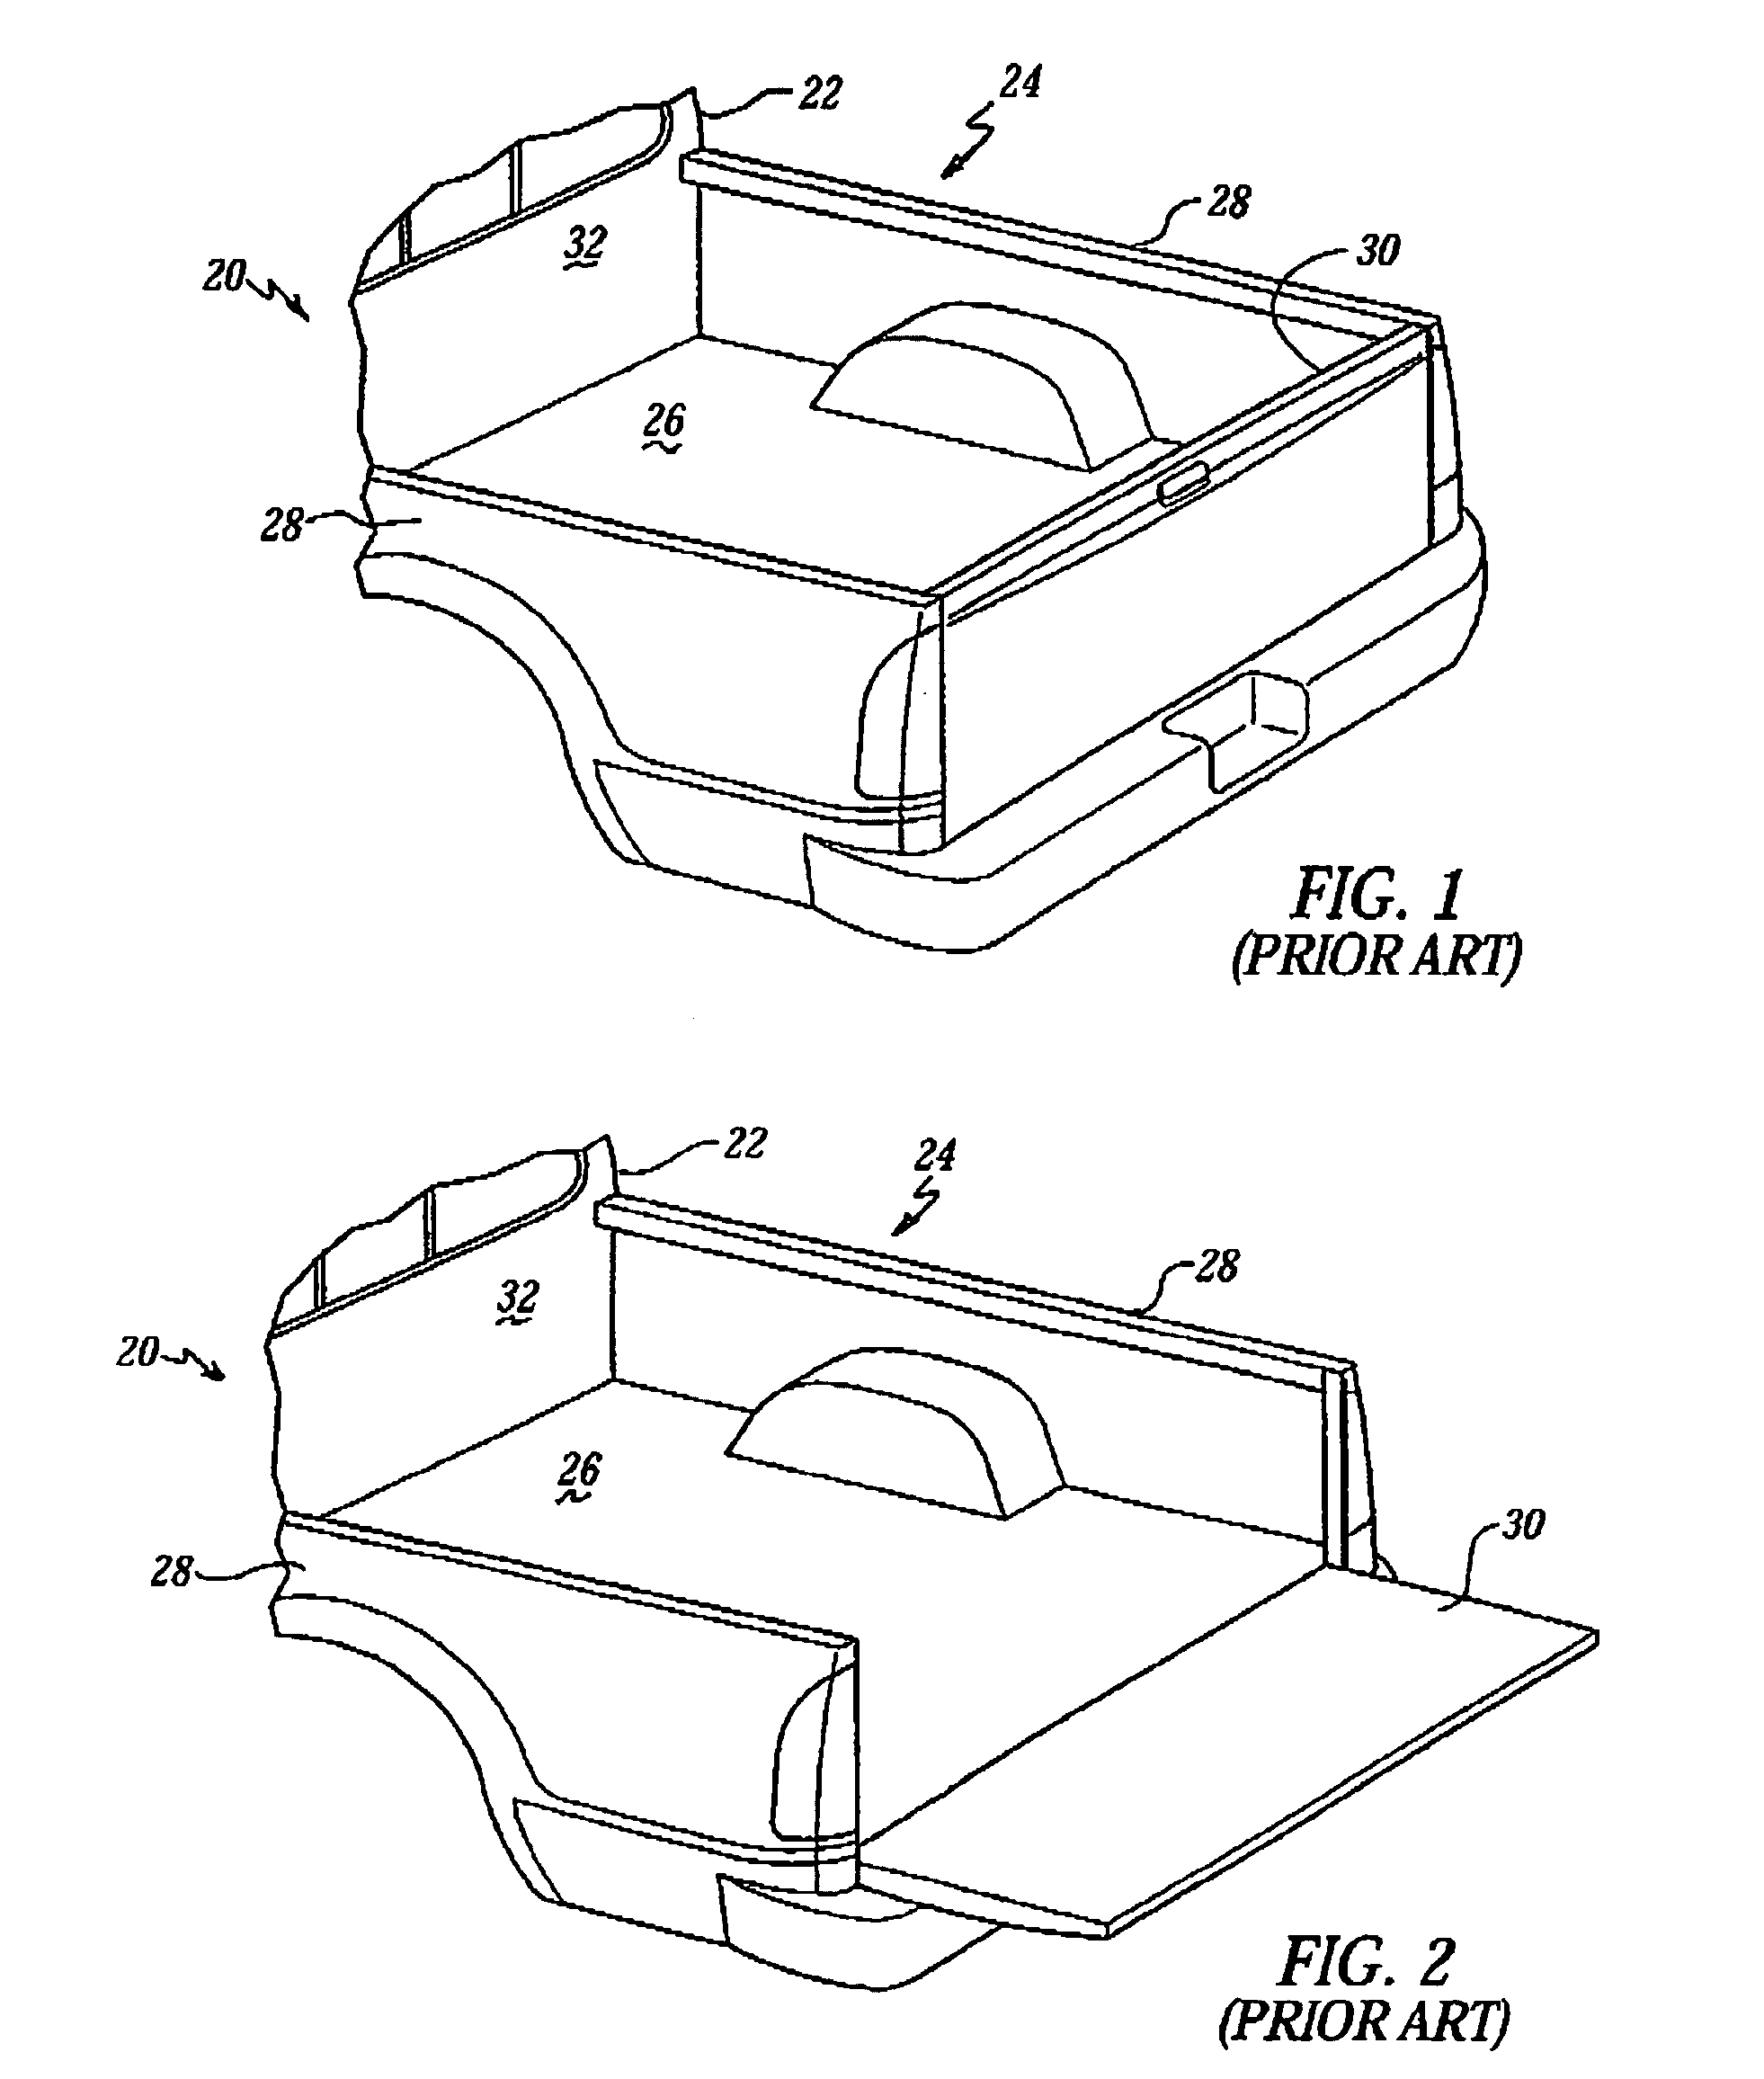 Vehicle cargo bed extender having a pin lock assembly